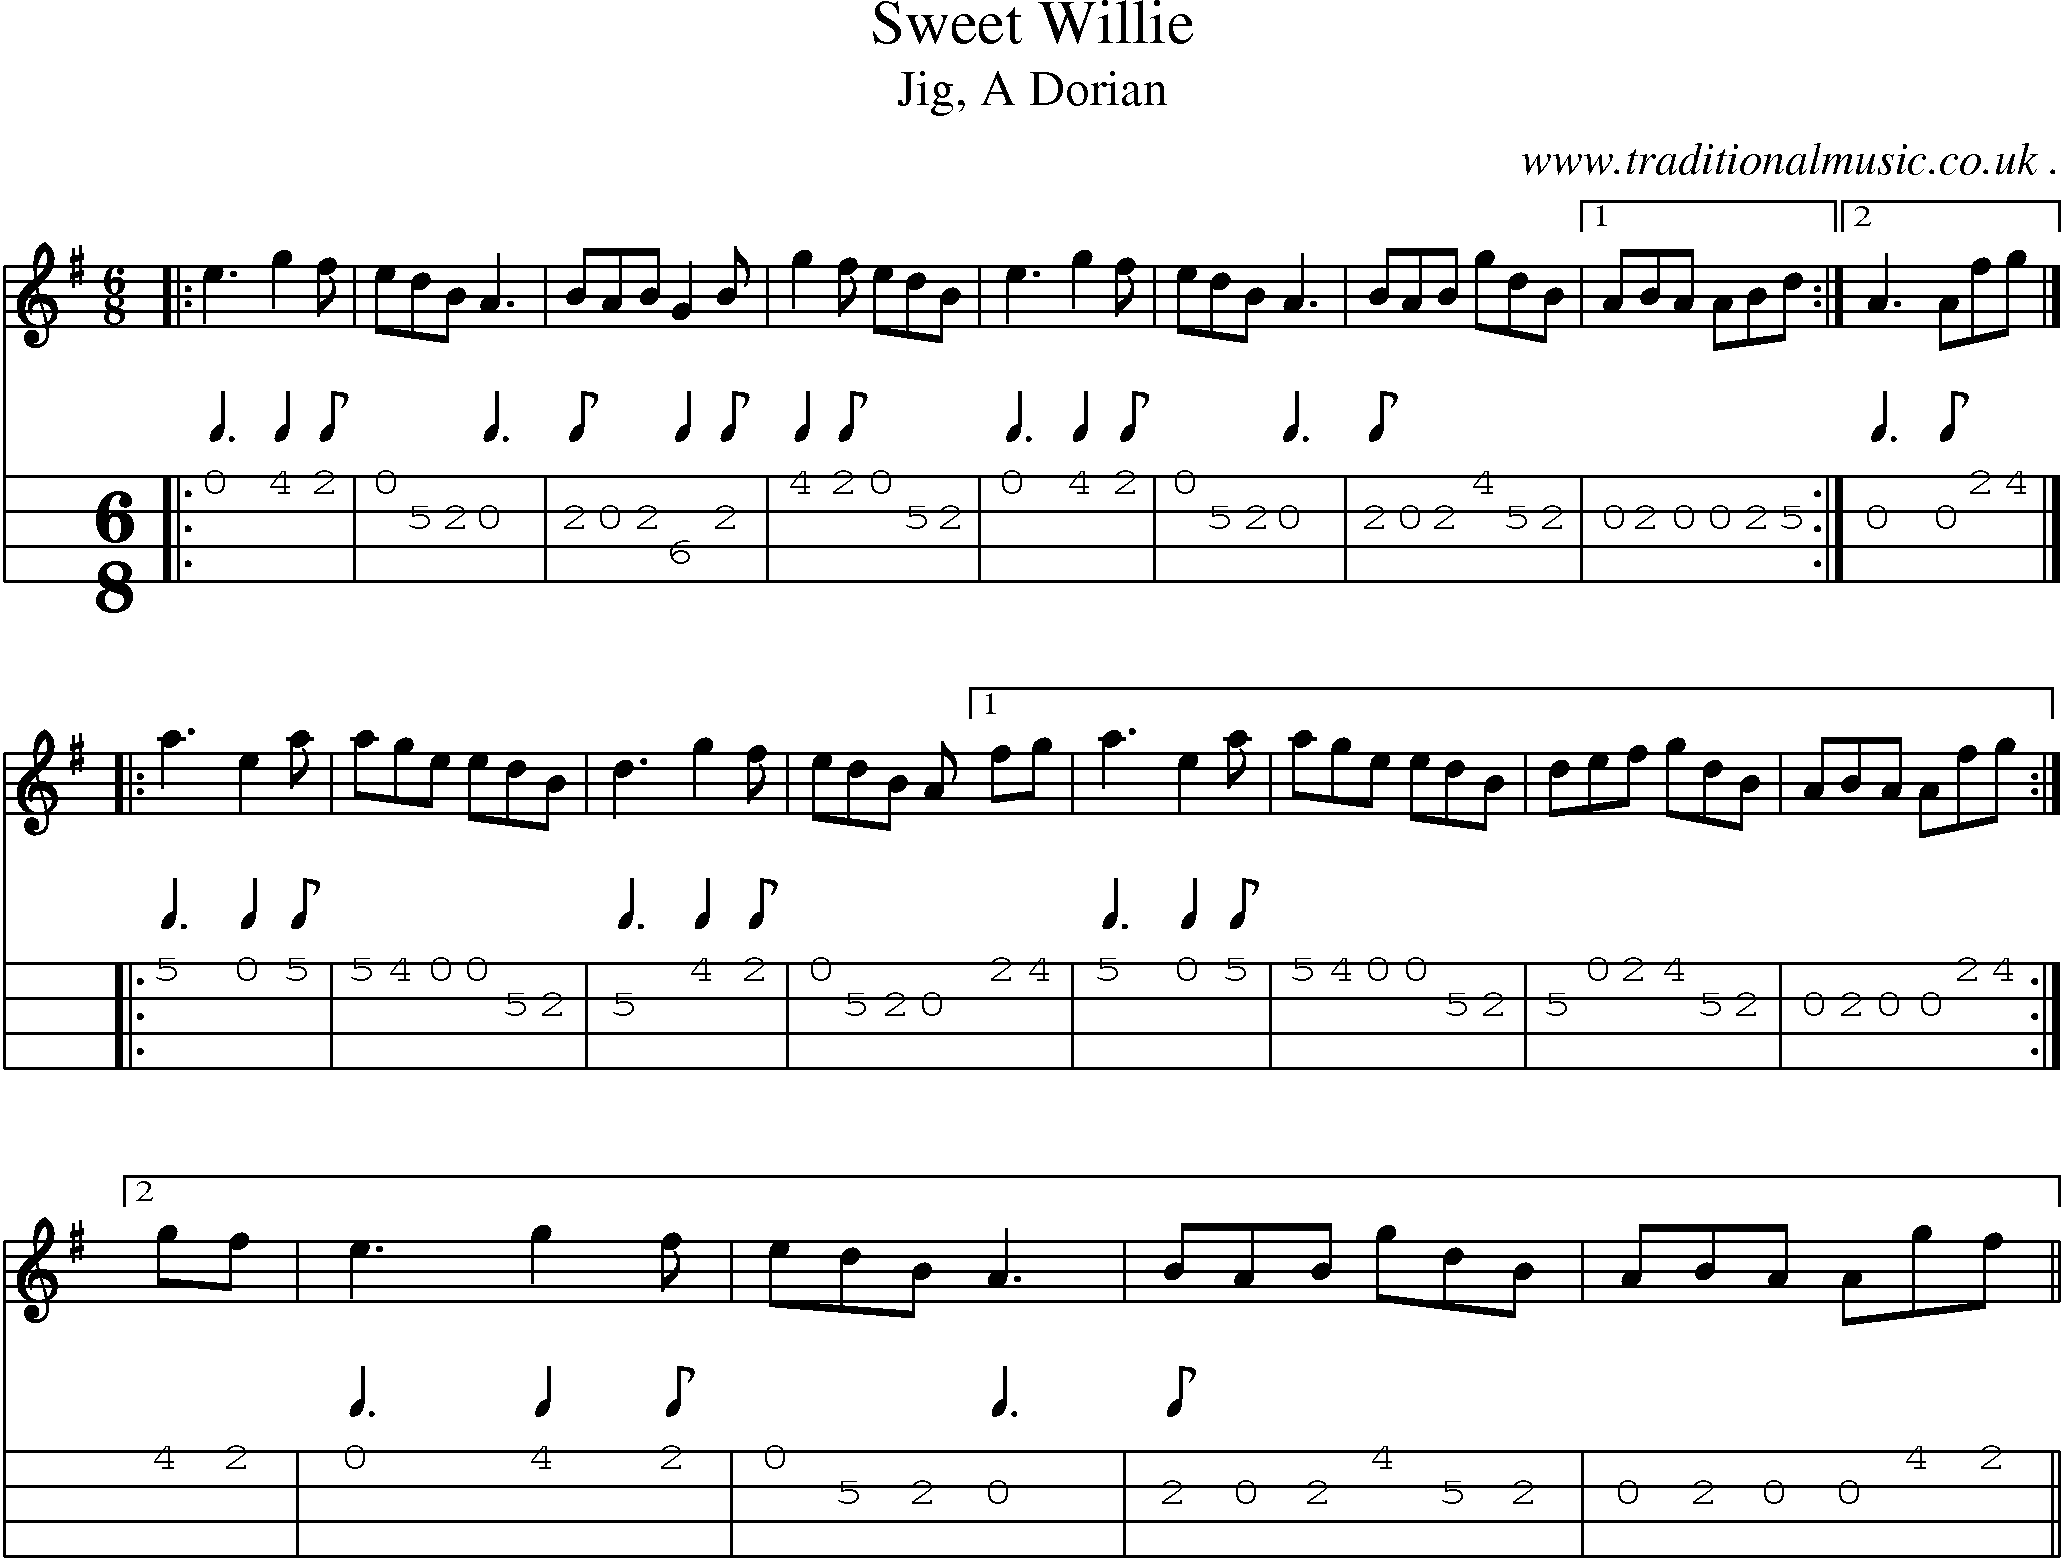 Sheet-music  score, Chords and Mandolin Tabs for Sweet Willie